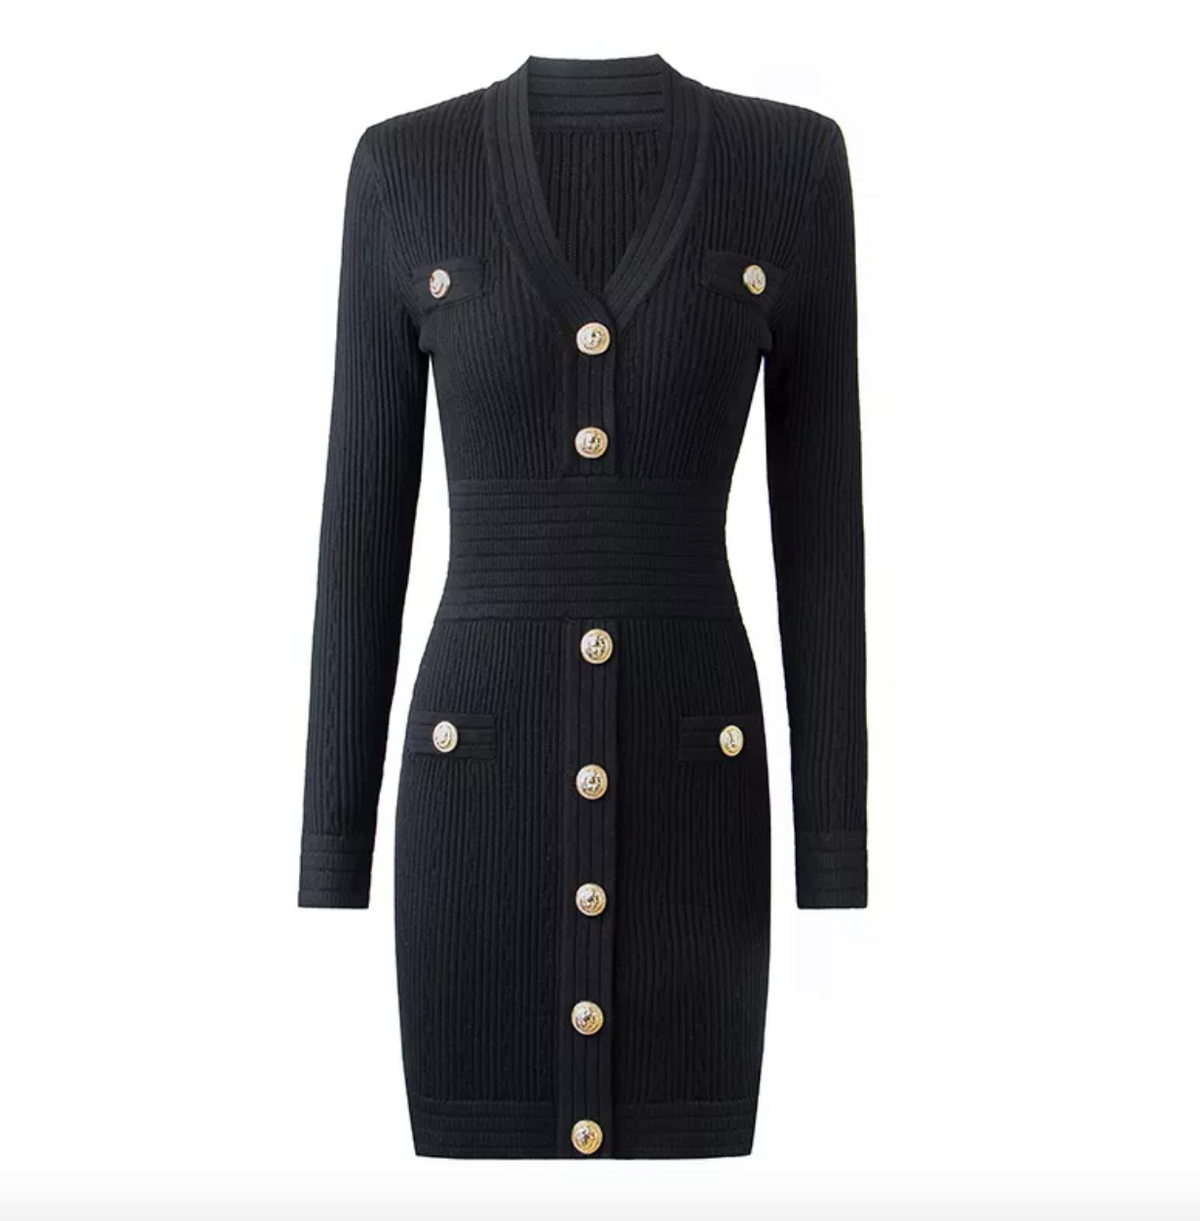 The Natalynska Sasha dress is an elegant long-sleeved mini dress with deep plunging neckline, and gold button detail. This sexy, sophisticated dress balmain inspired black